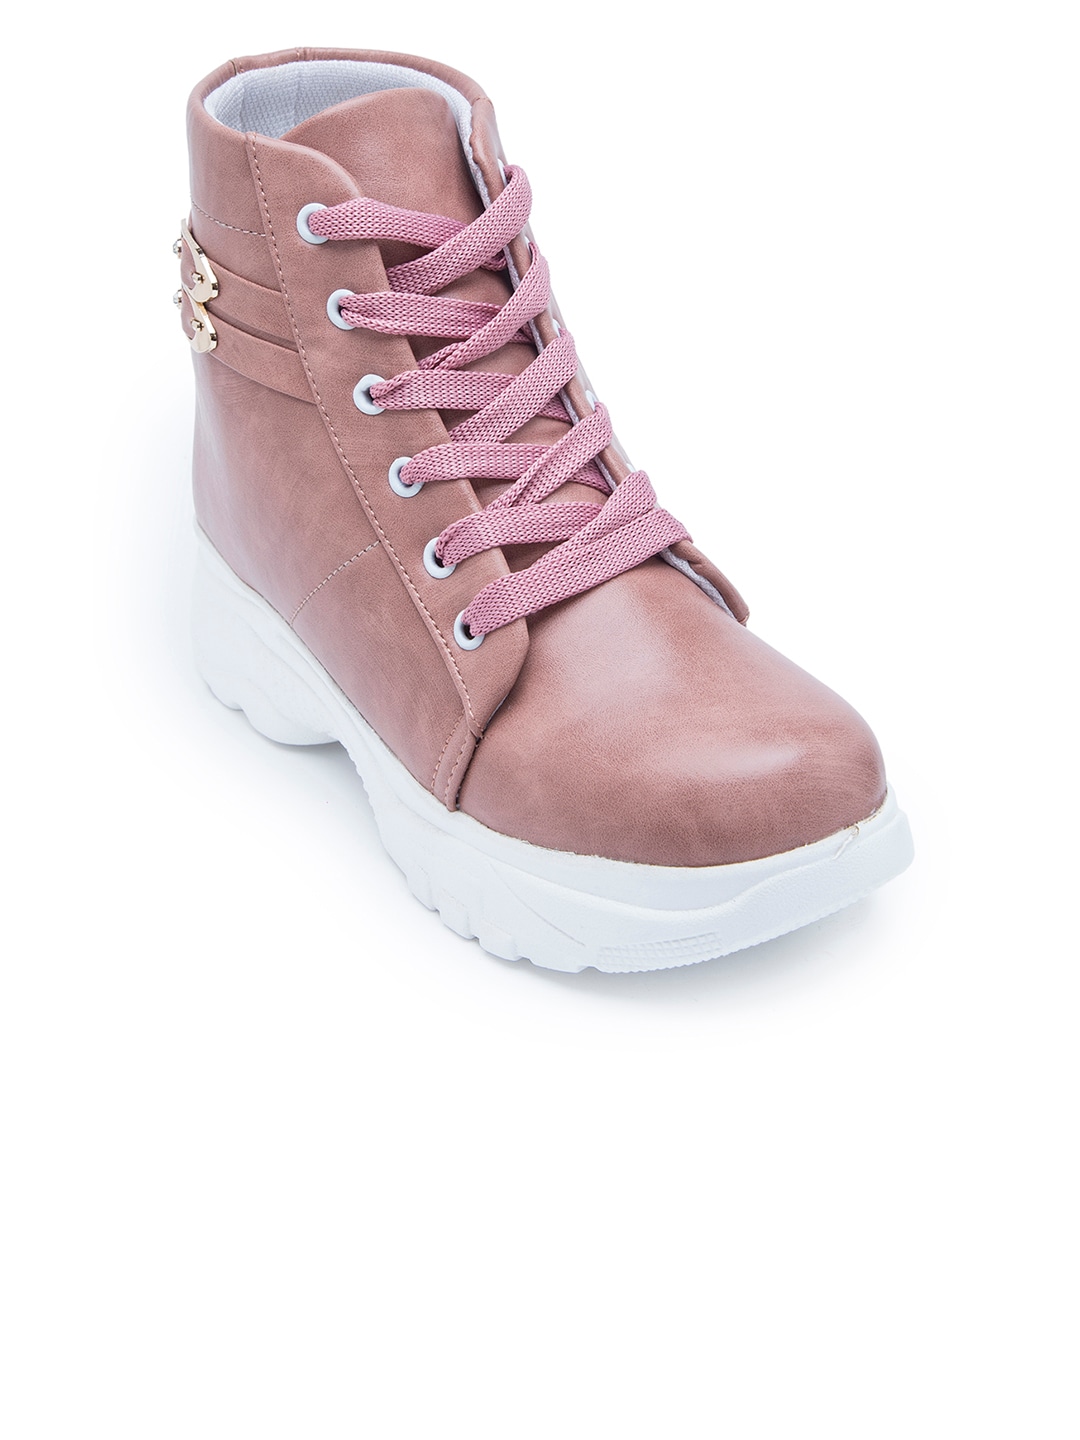 DEAS Pink High-Top Comfort Heeled Boots Price in India